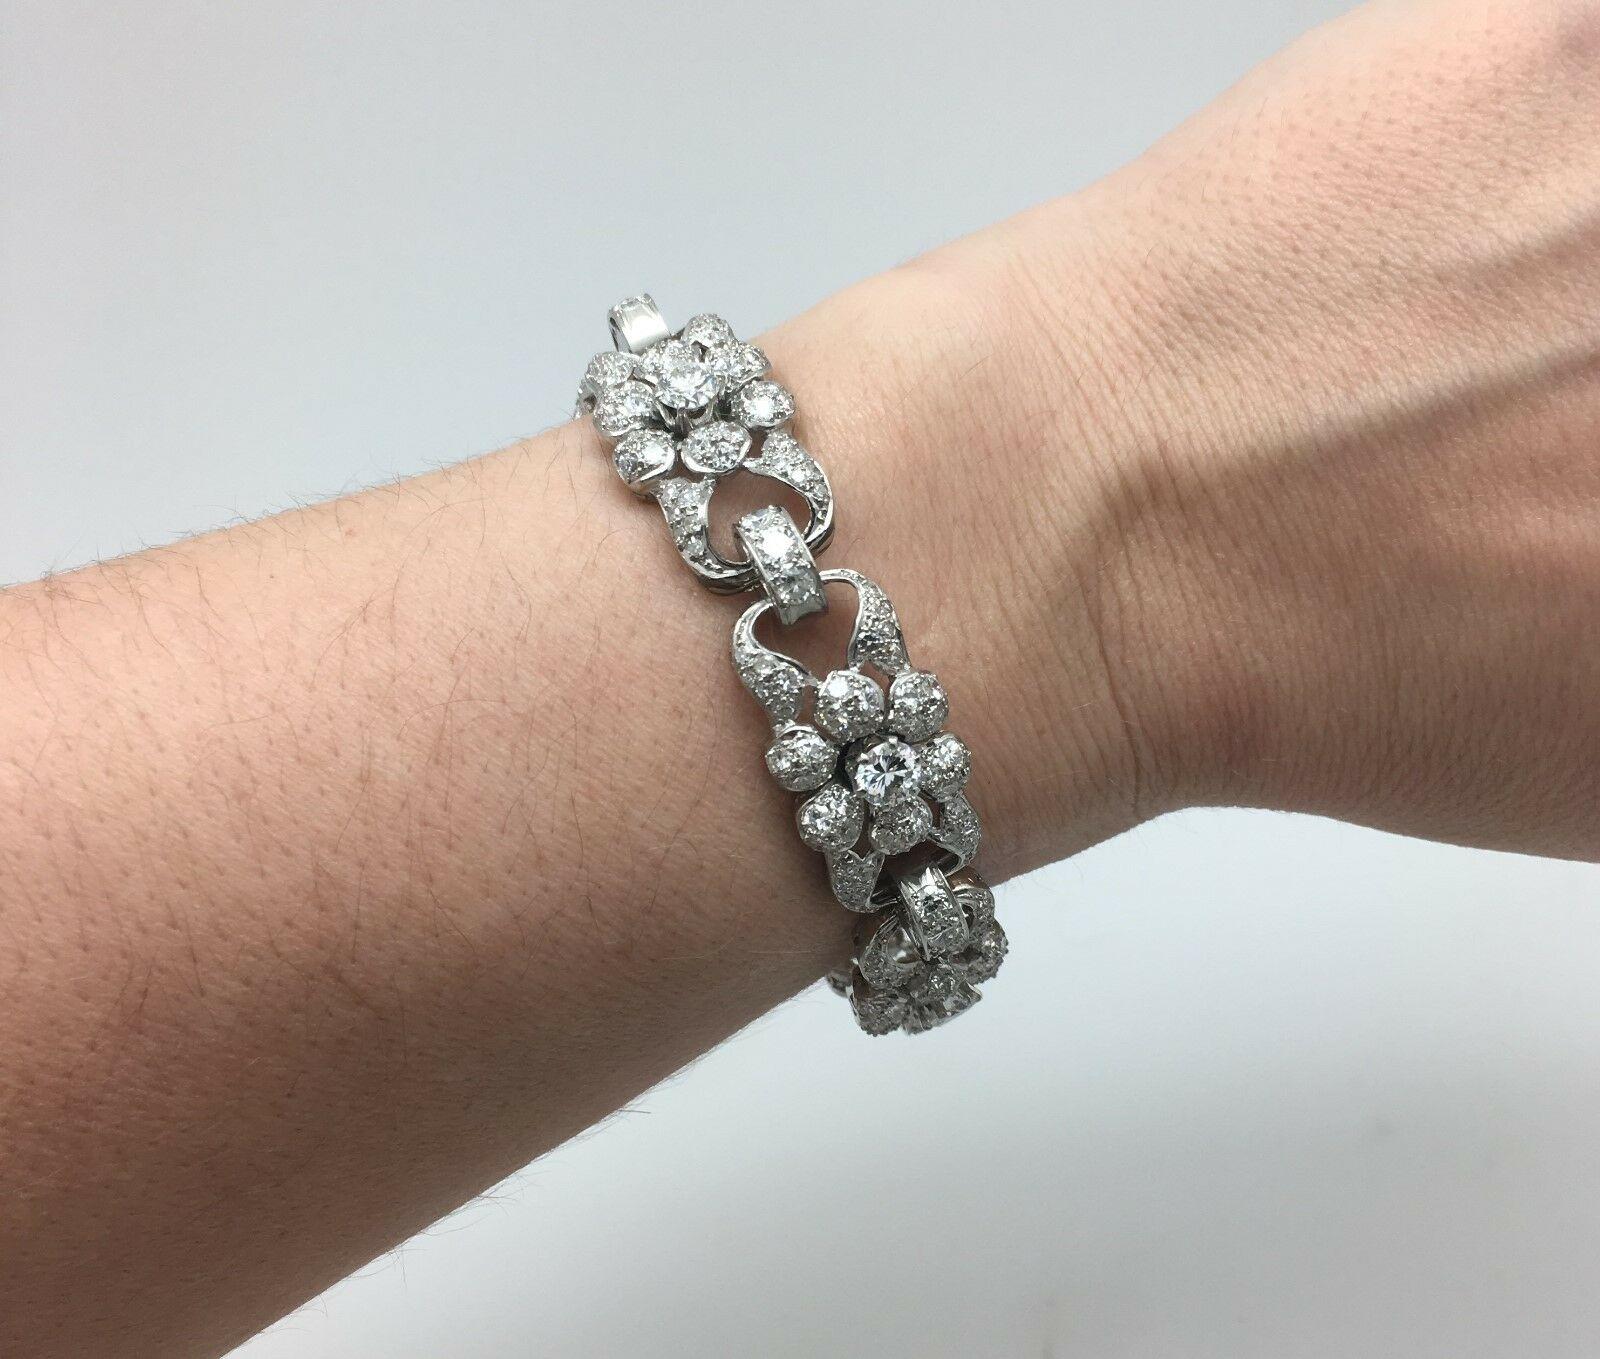 Estate Antique Art Deco Platinum 12.00 CTW Diamond Tennis Bracelet 44.2 Grams

There Are 6 Round Old European Cut Natural Diamonds, Of About 0.50 Points Each, 
Weighing Approximately 3.00 Carat Total Weight.  
Color Grade: G-H
Clarity Grade: